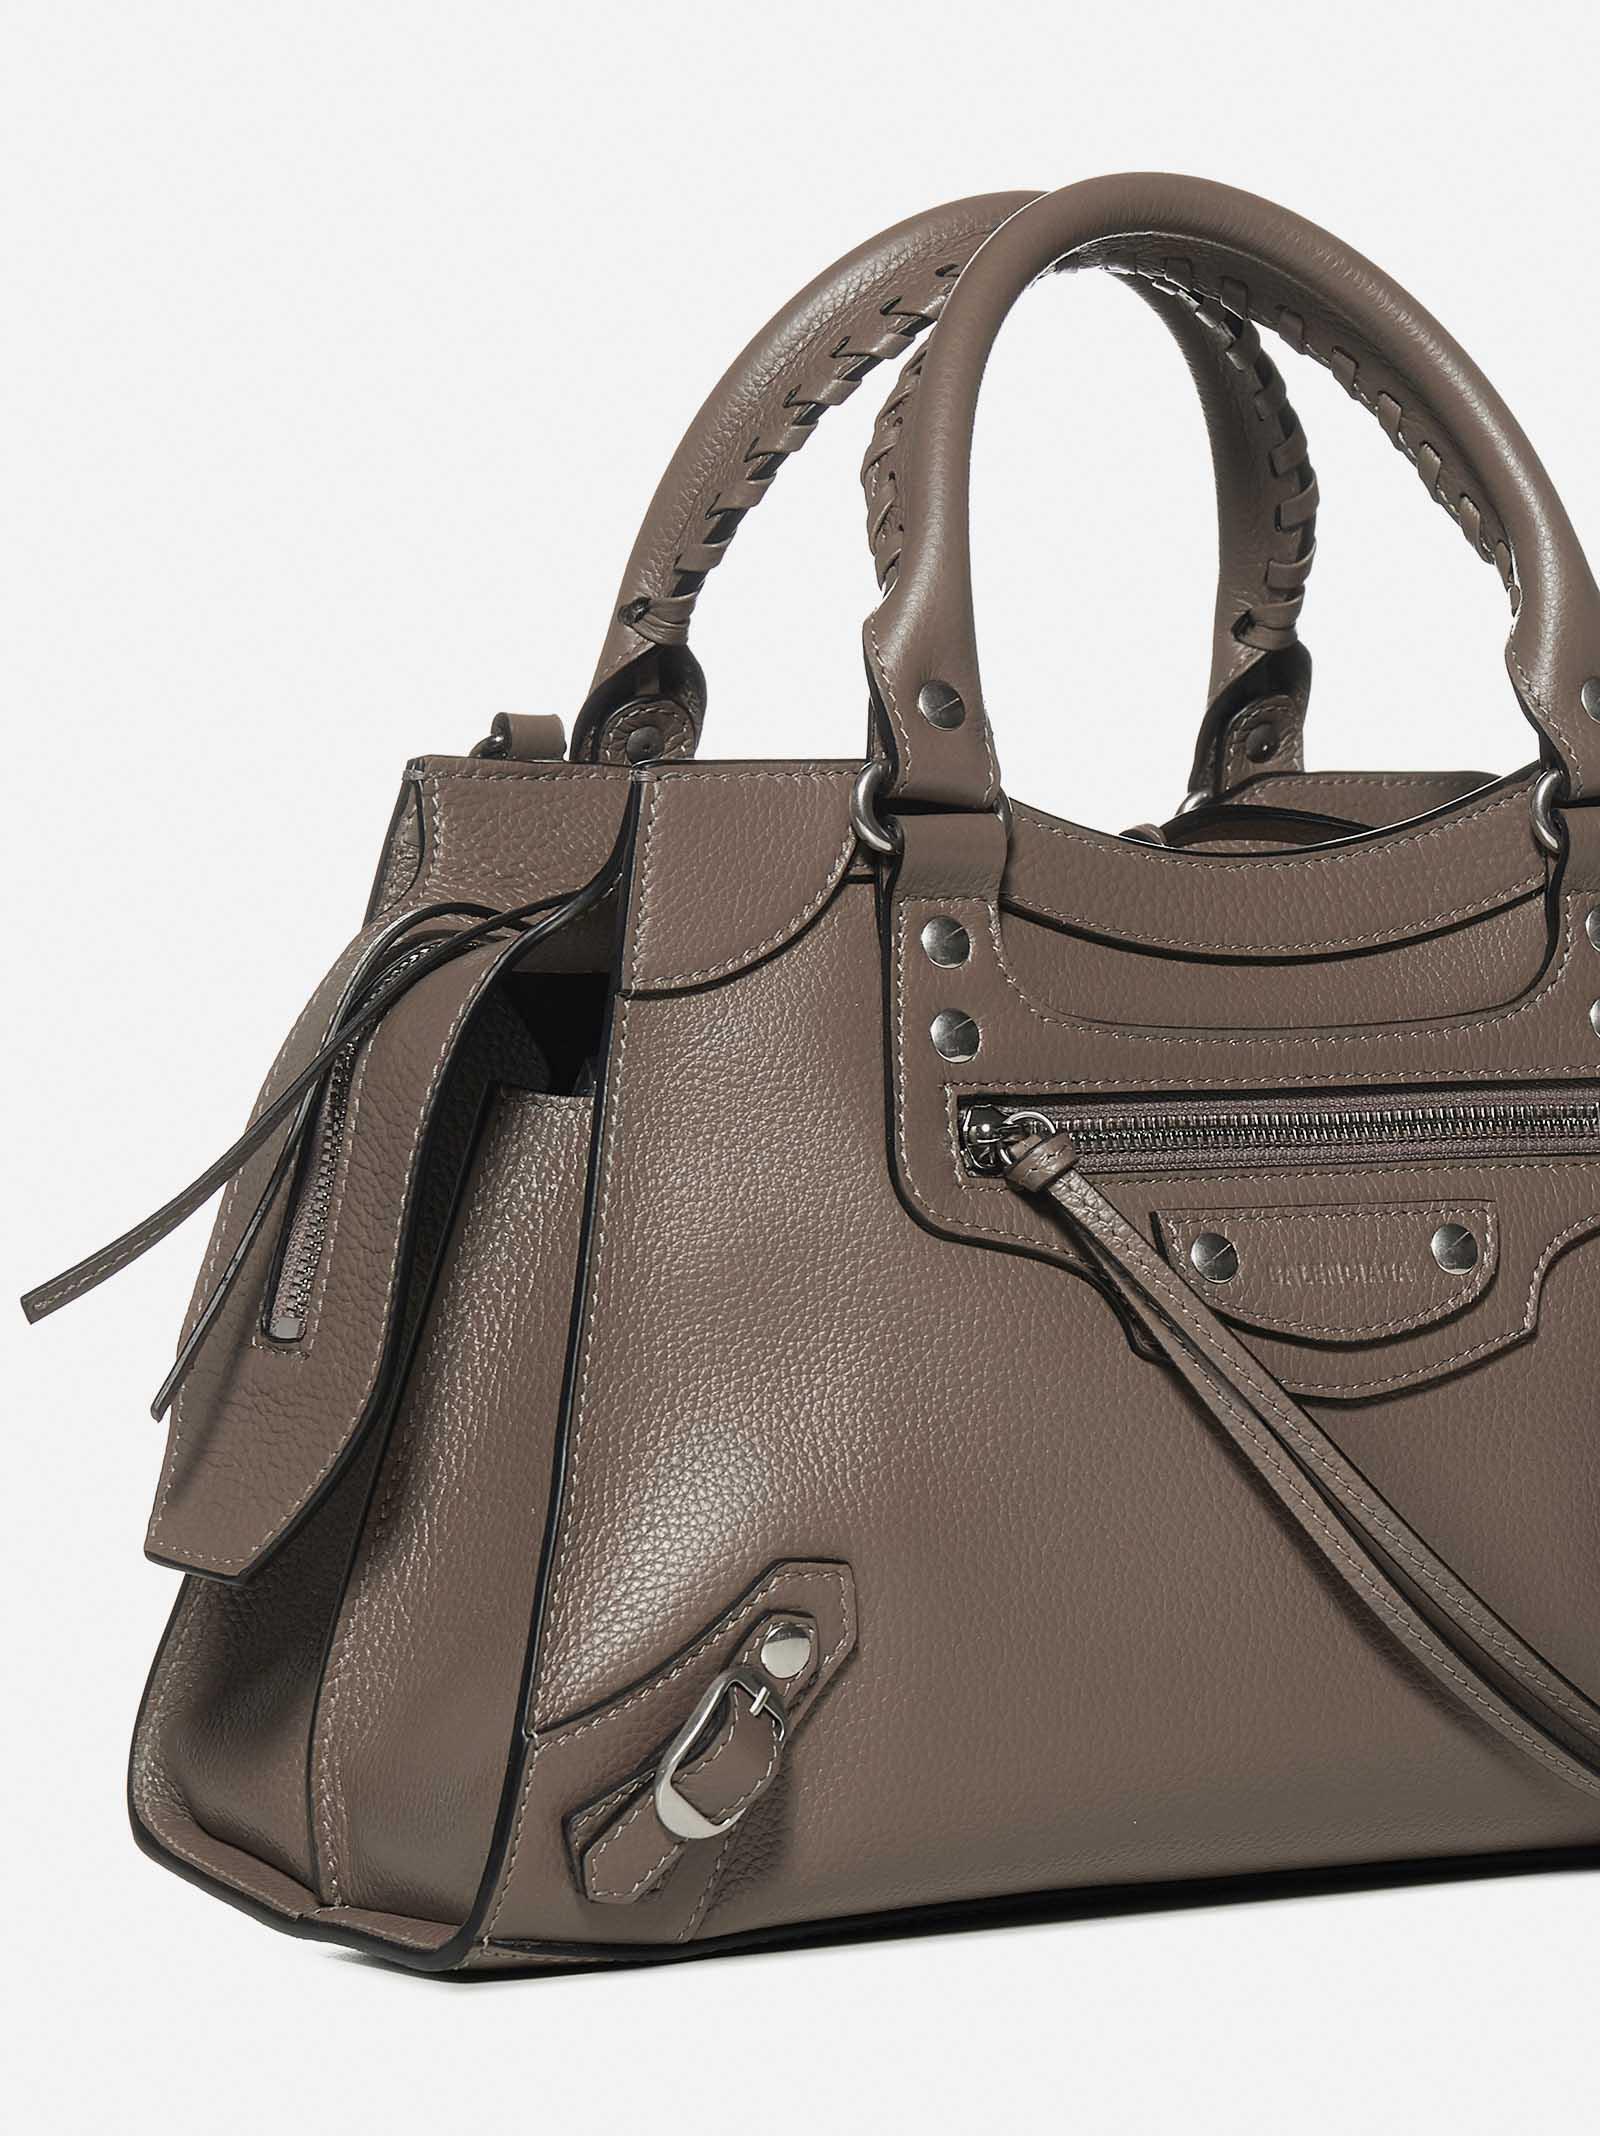 Balenciaga Neo Classic Small Leather Bag in Brown | Lyst